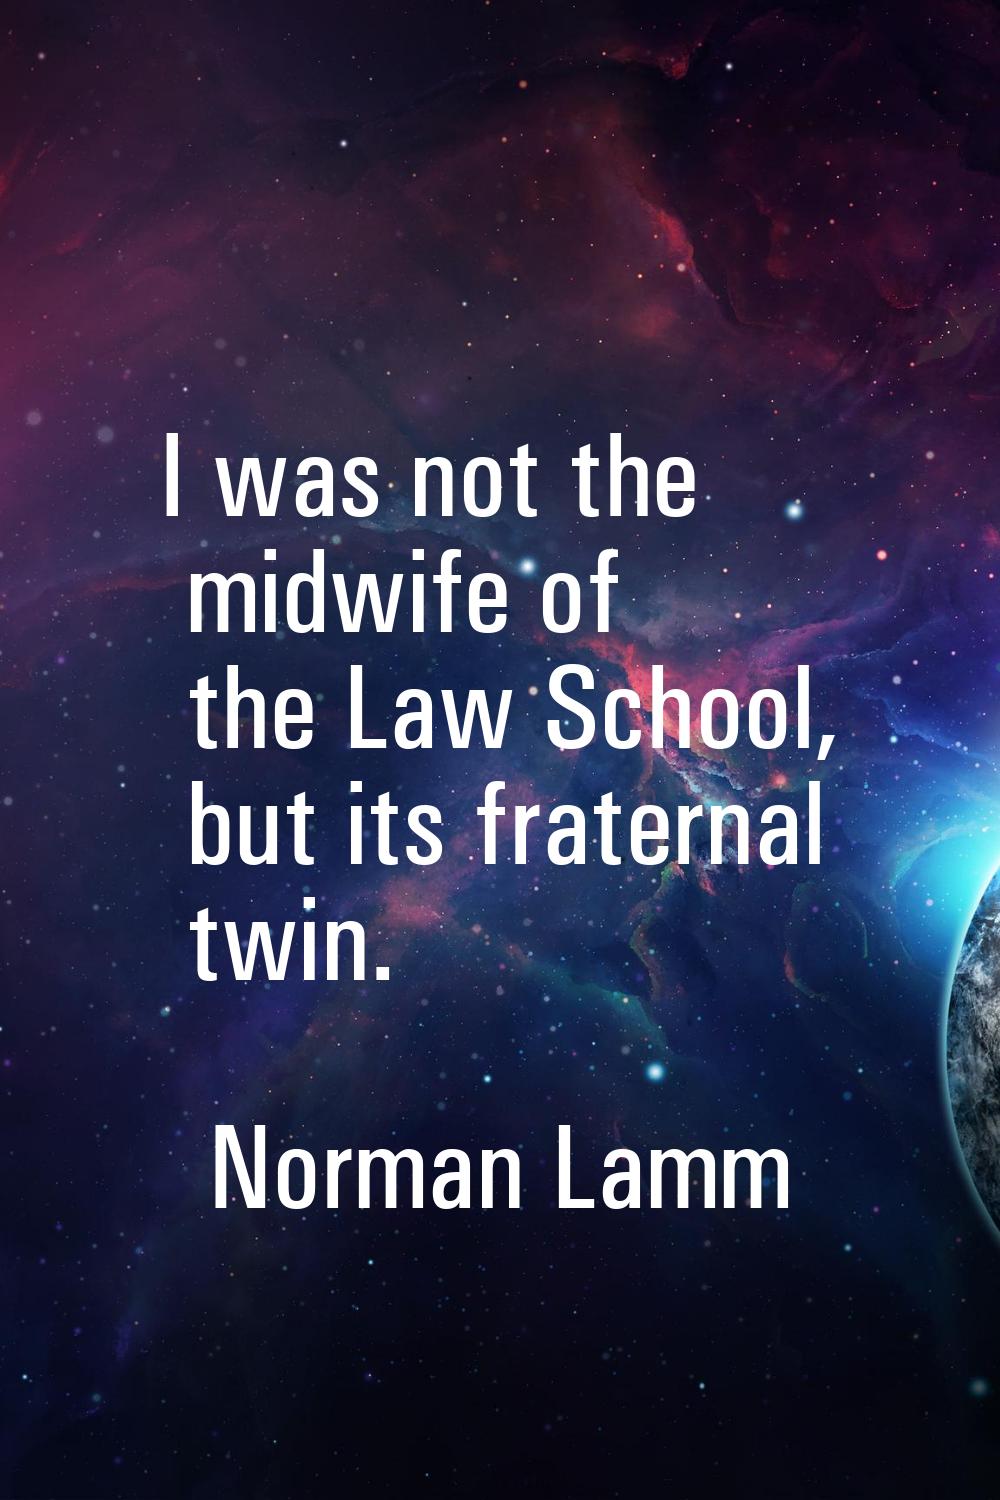 I was not the midwife of the Law School, but its fraternal twin.